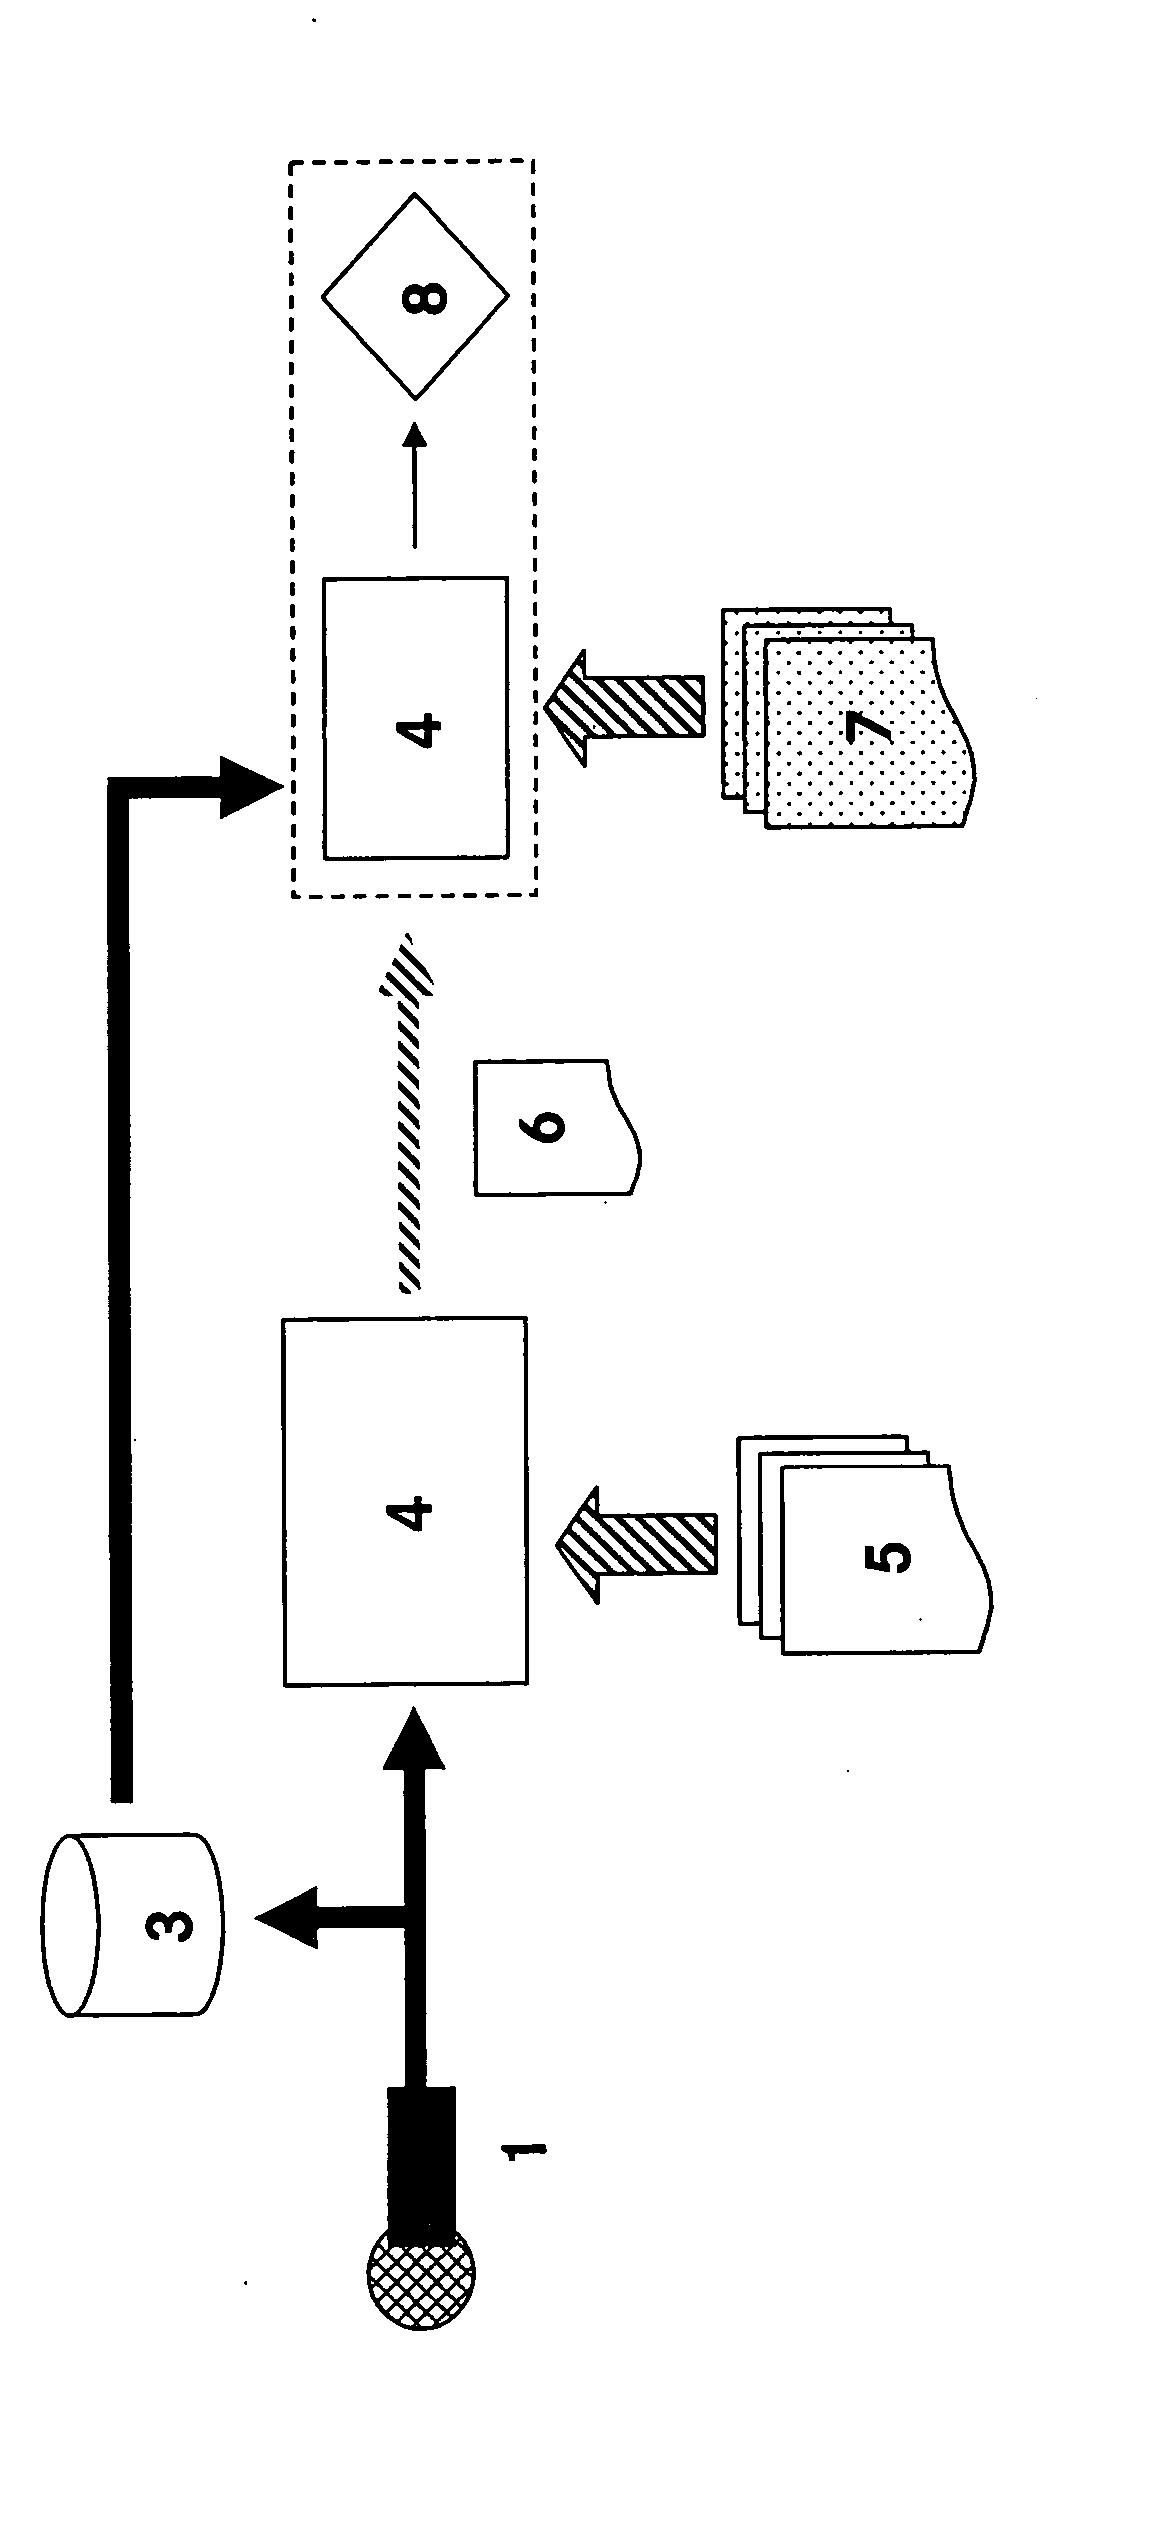 Process and device for interaction with a speech recognition system for selection of elements from lists